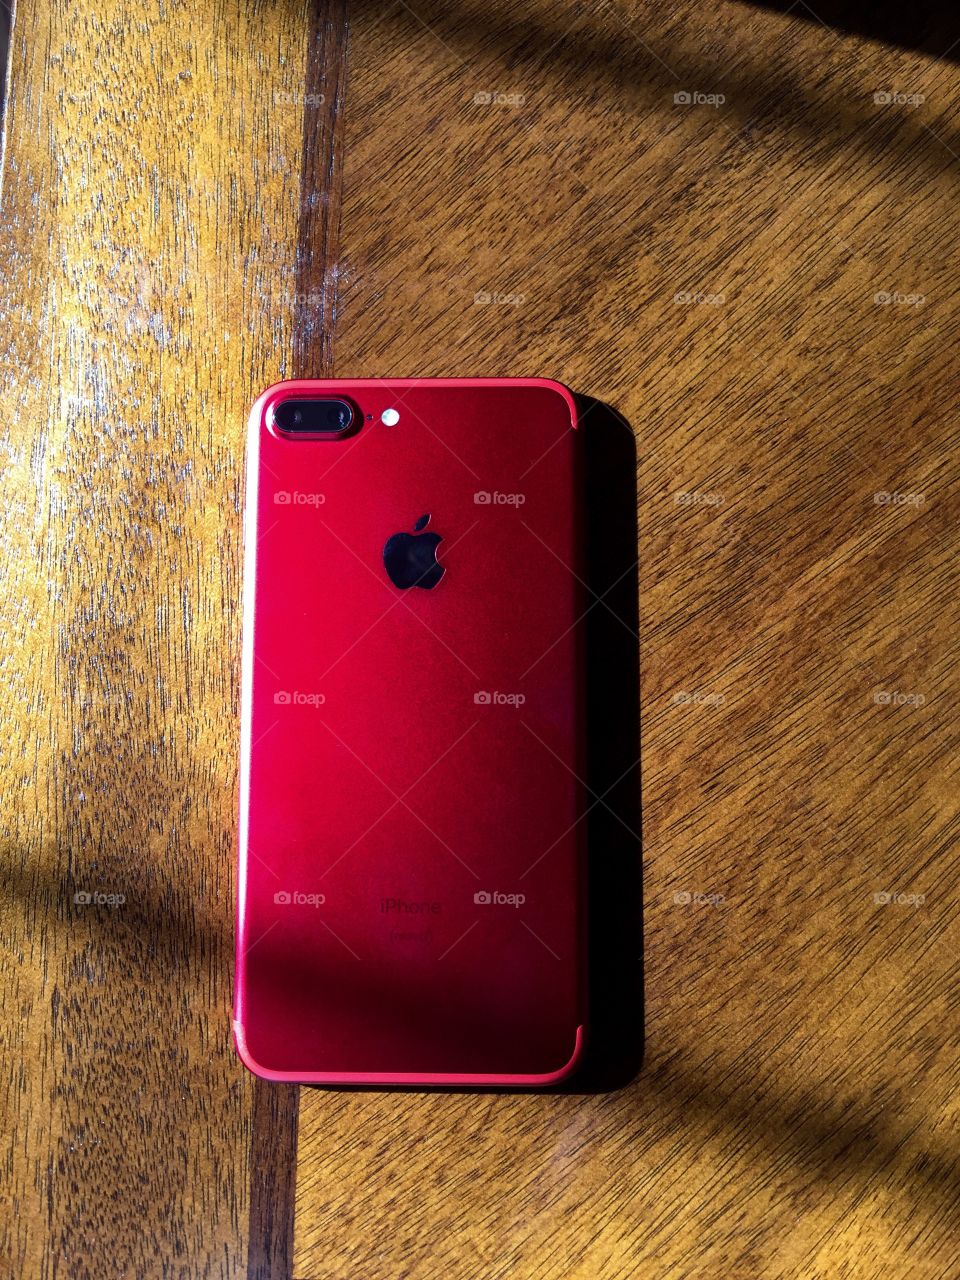 This is an iPhone 7 Plus Red special edition. It's for HIV awareness. I guess a certain percentage goes to organizations that promote awareness of HIV. This phone was bought with a good cause in mind. I had taken the photo with an iPhone 6 Plus. This smart phone has two rear cameras with an led light next to it. It's sitting on a wooden table with sunlight coming in on its side through the window . I love this phone and encourage you to go buy it